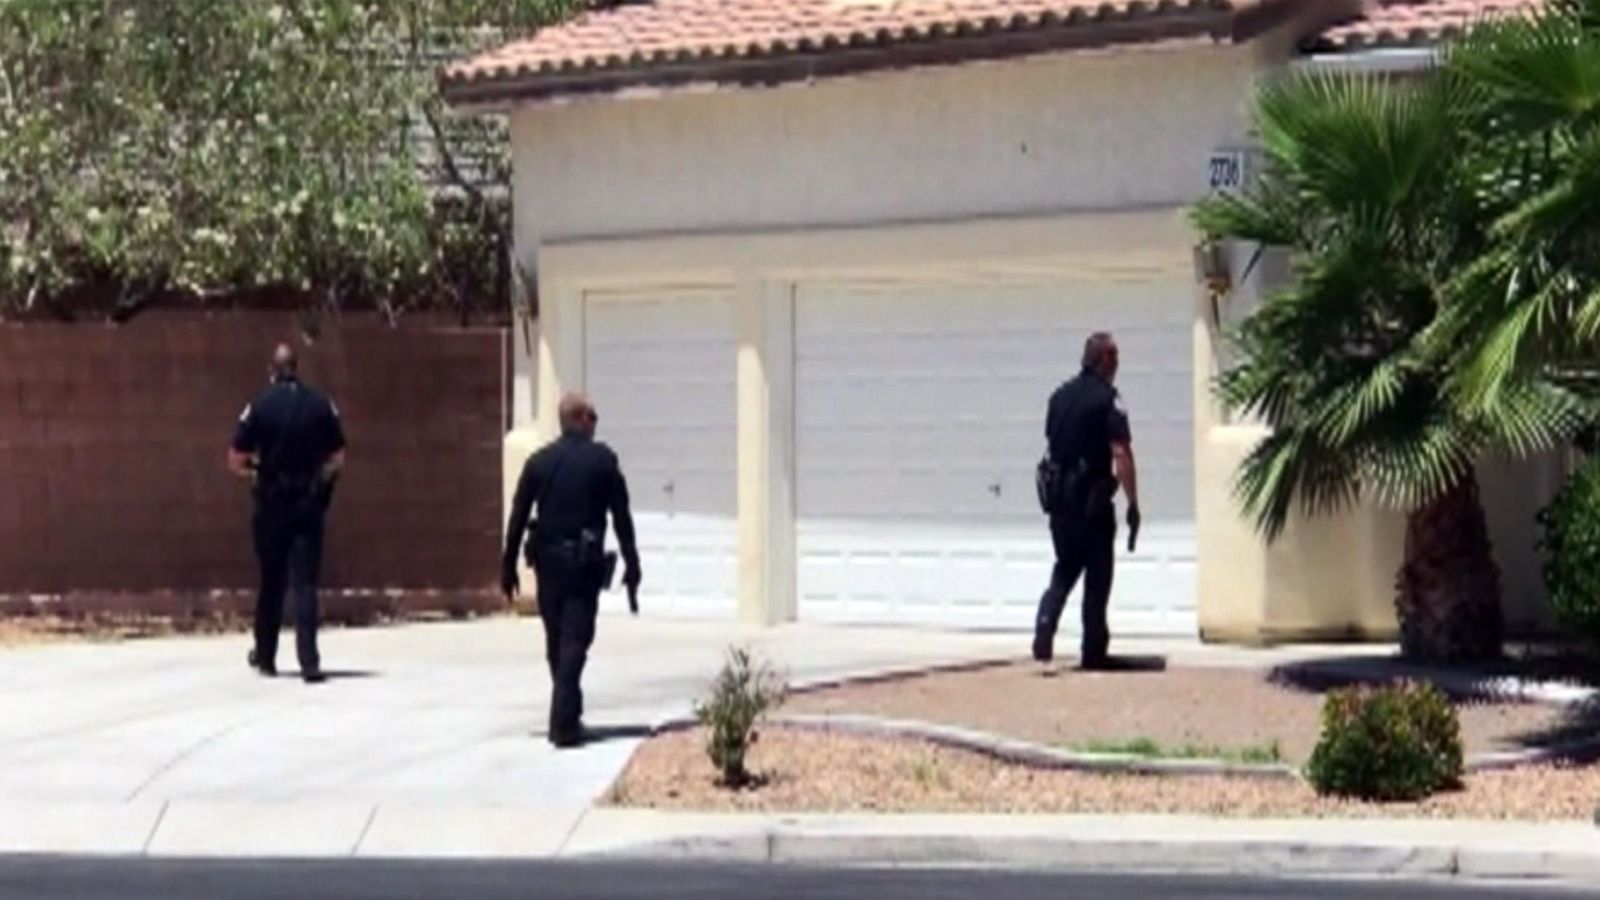 Las Vegas boy, 17, dies during game of 'Russian roulette' in abandoned home